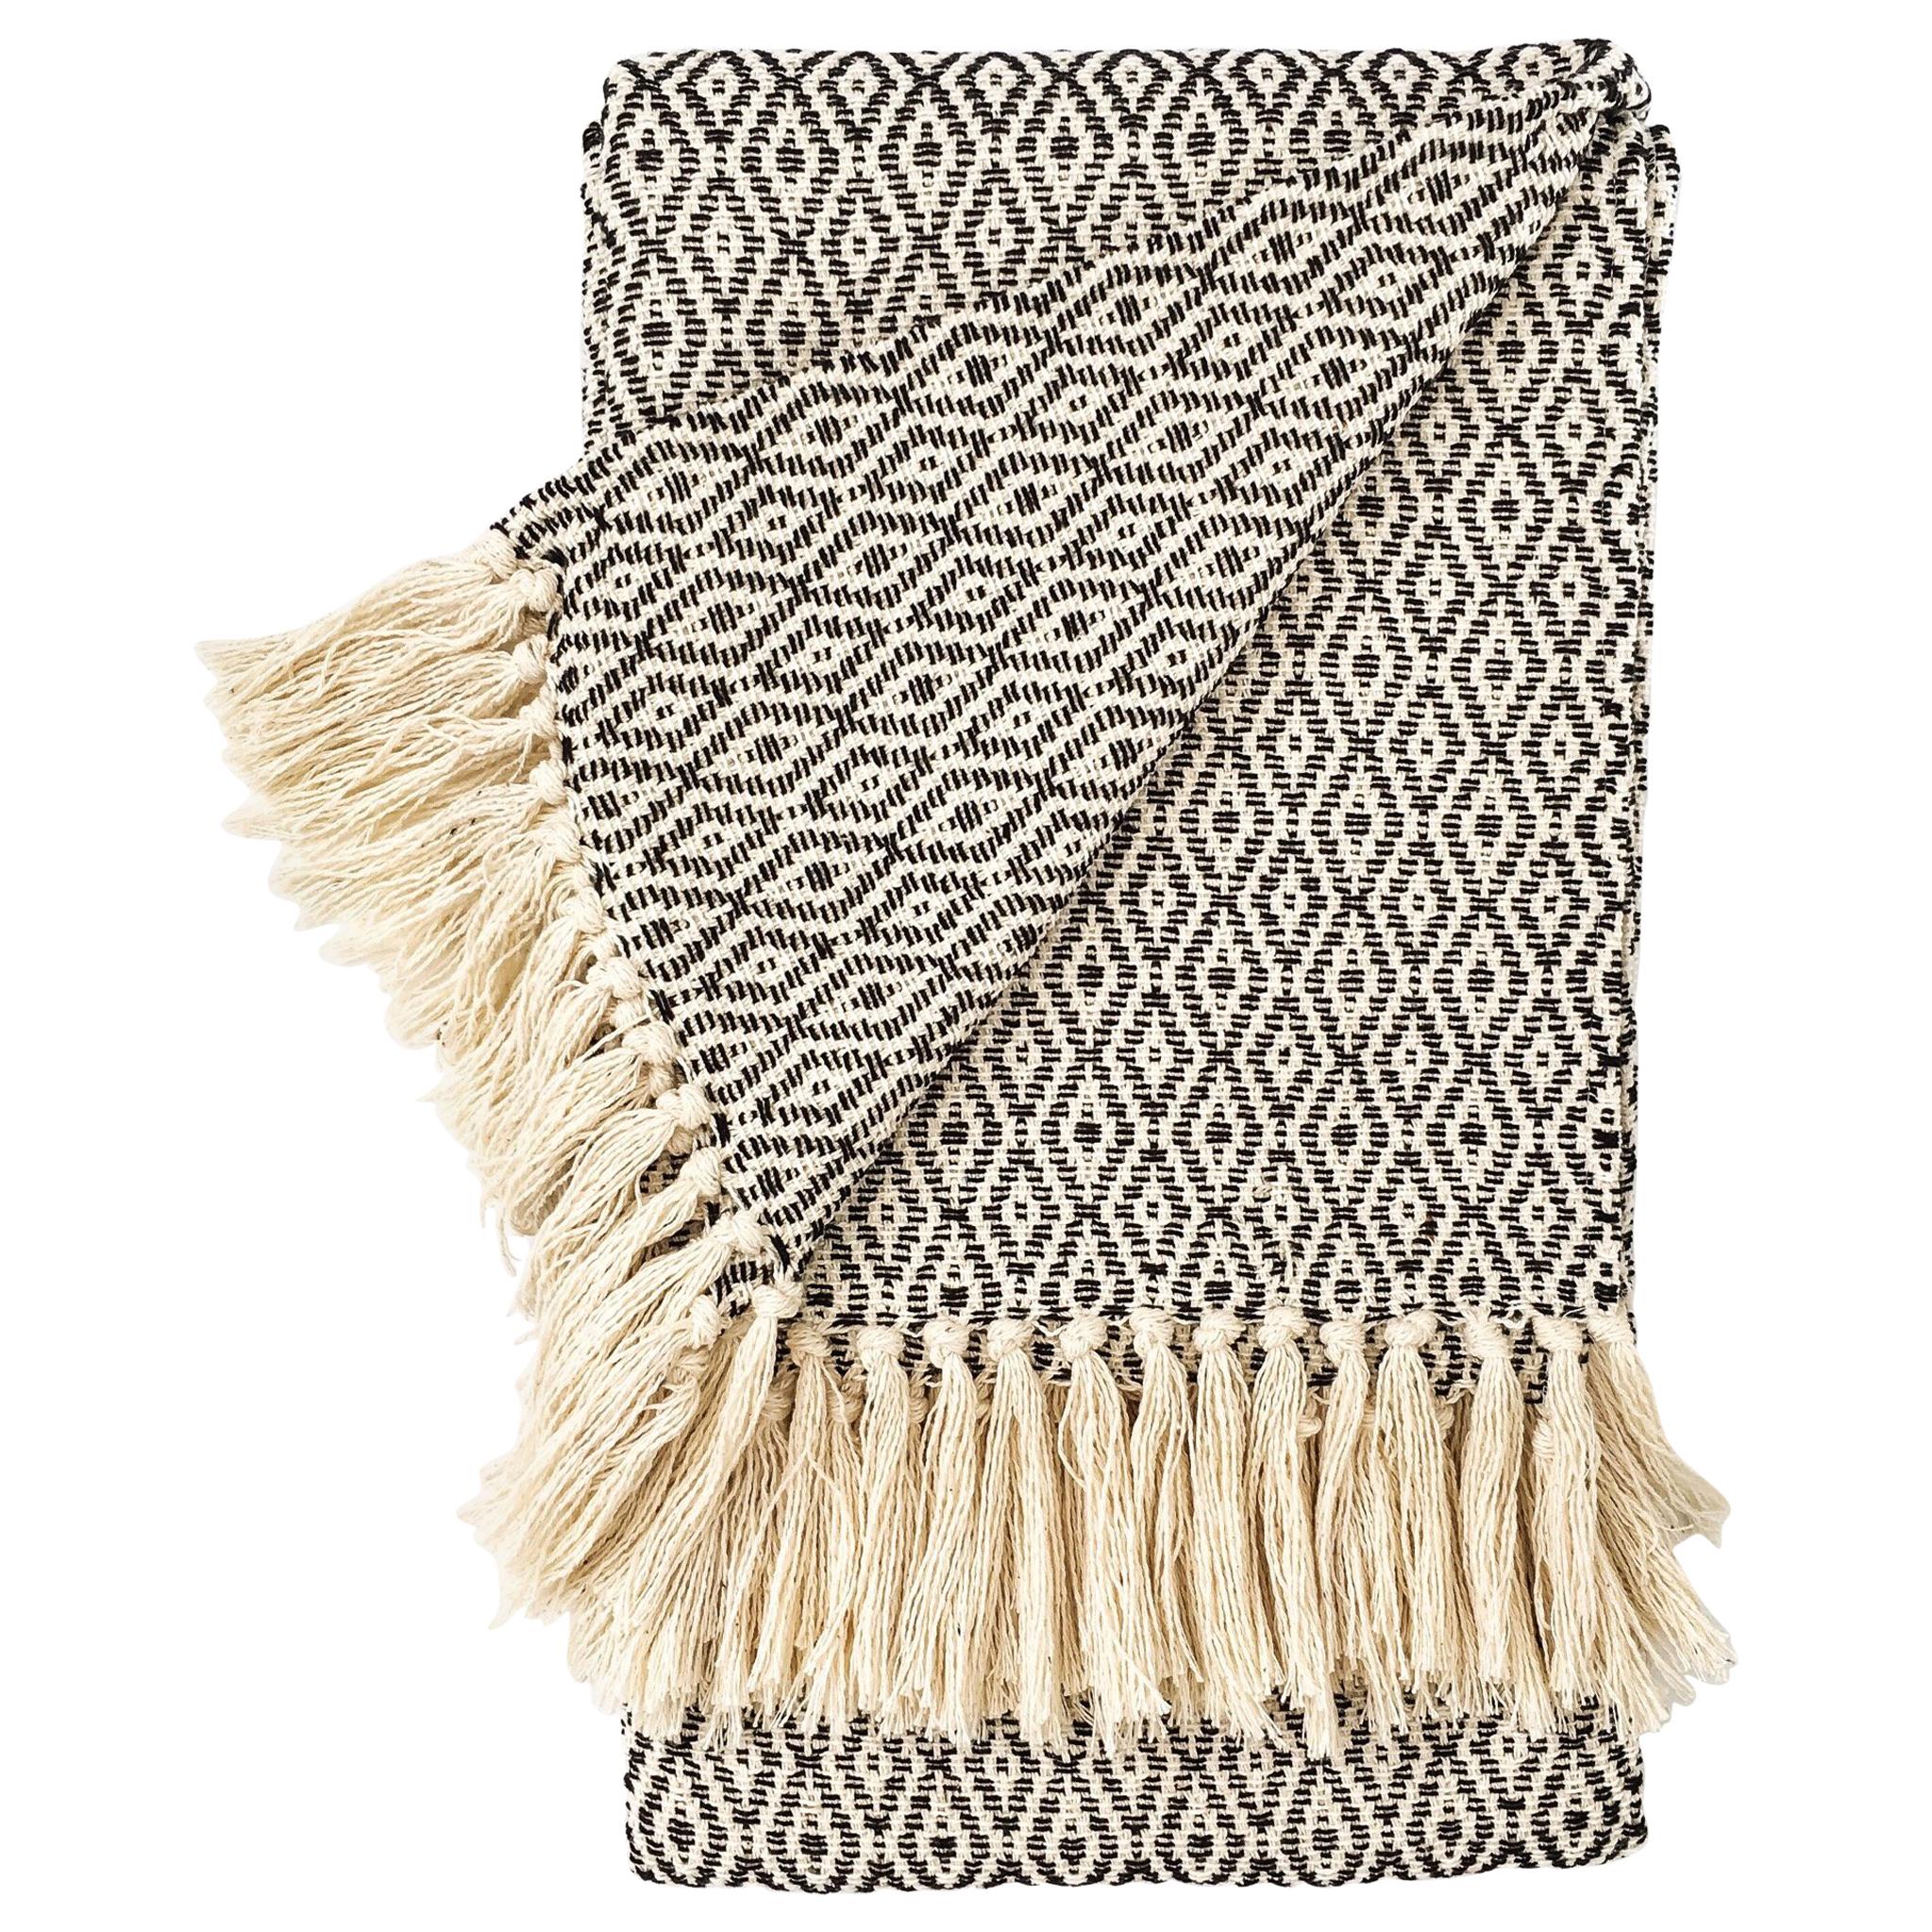 Handwoven Cotton Black and Natural Fringed Throw, in Stock